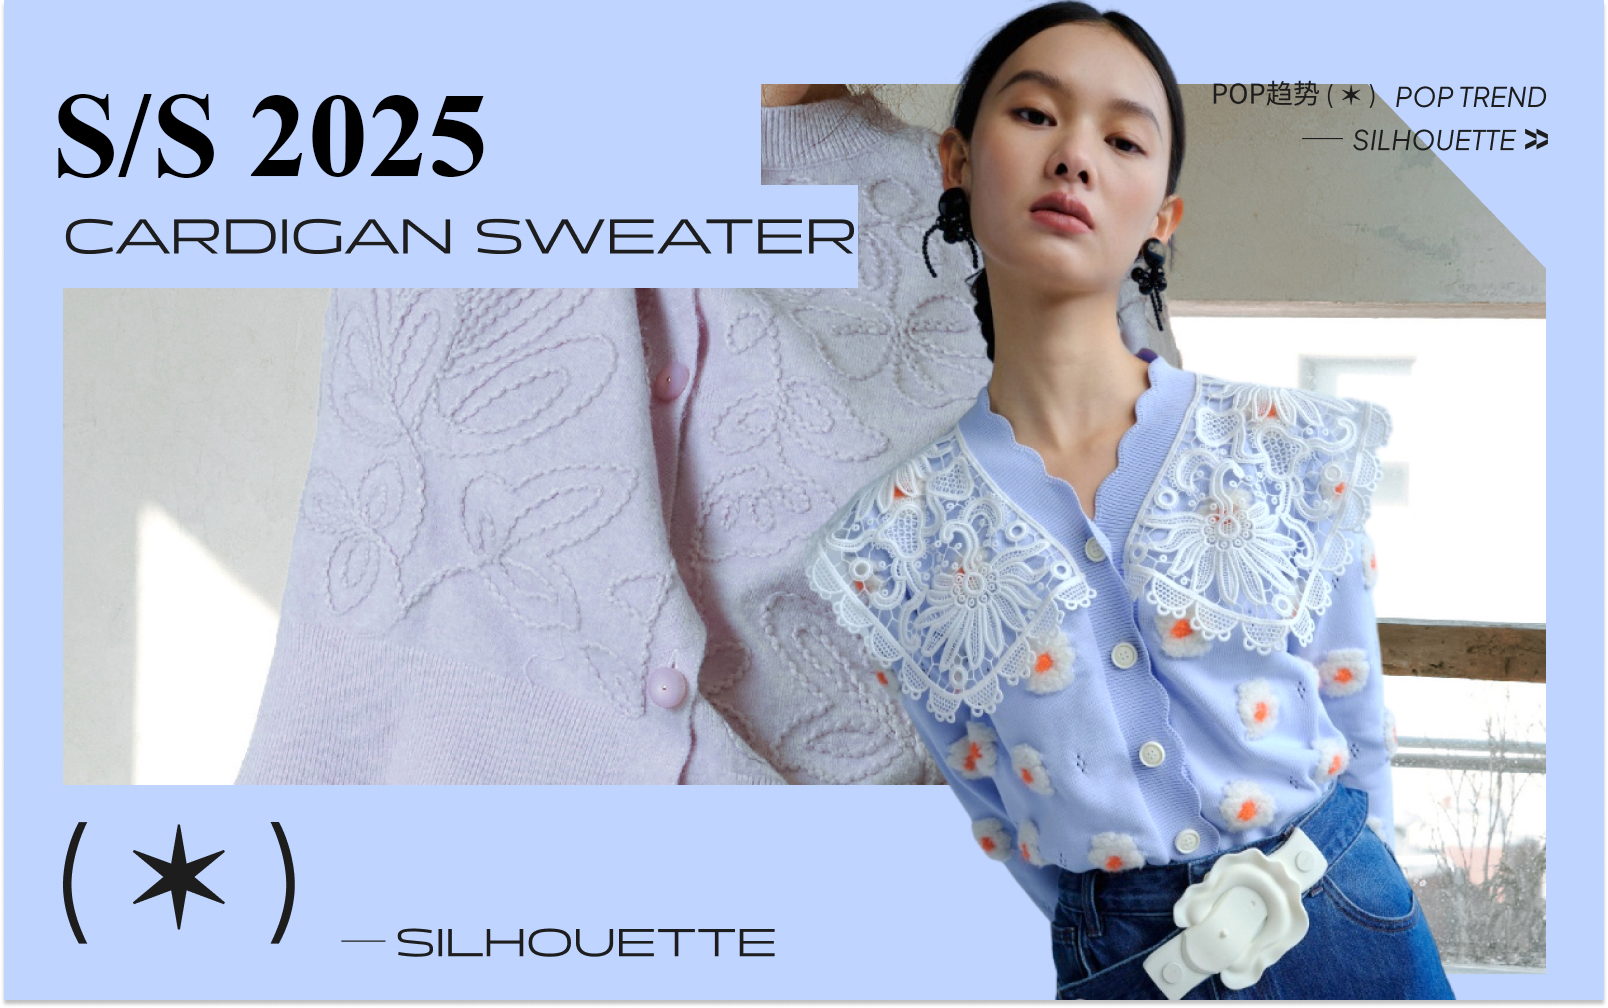 Youthful Ladies -- S/S 2025 Silhouette Trend for Women's Cardigan